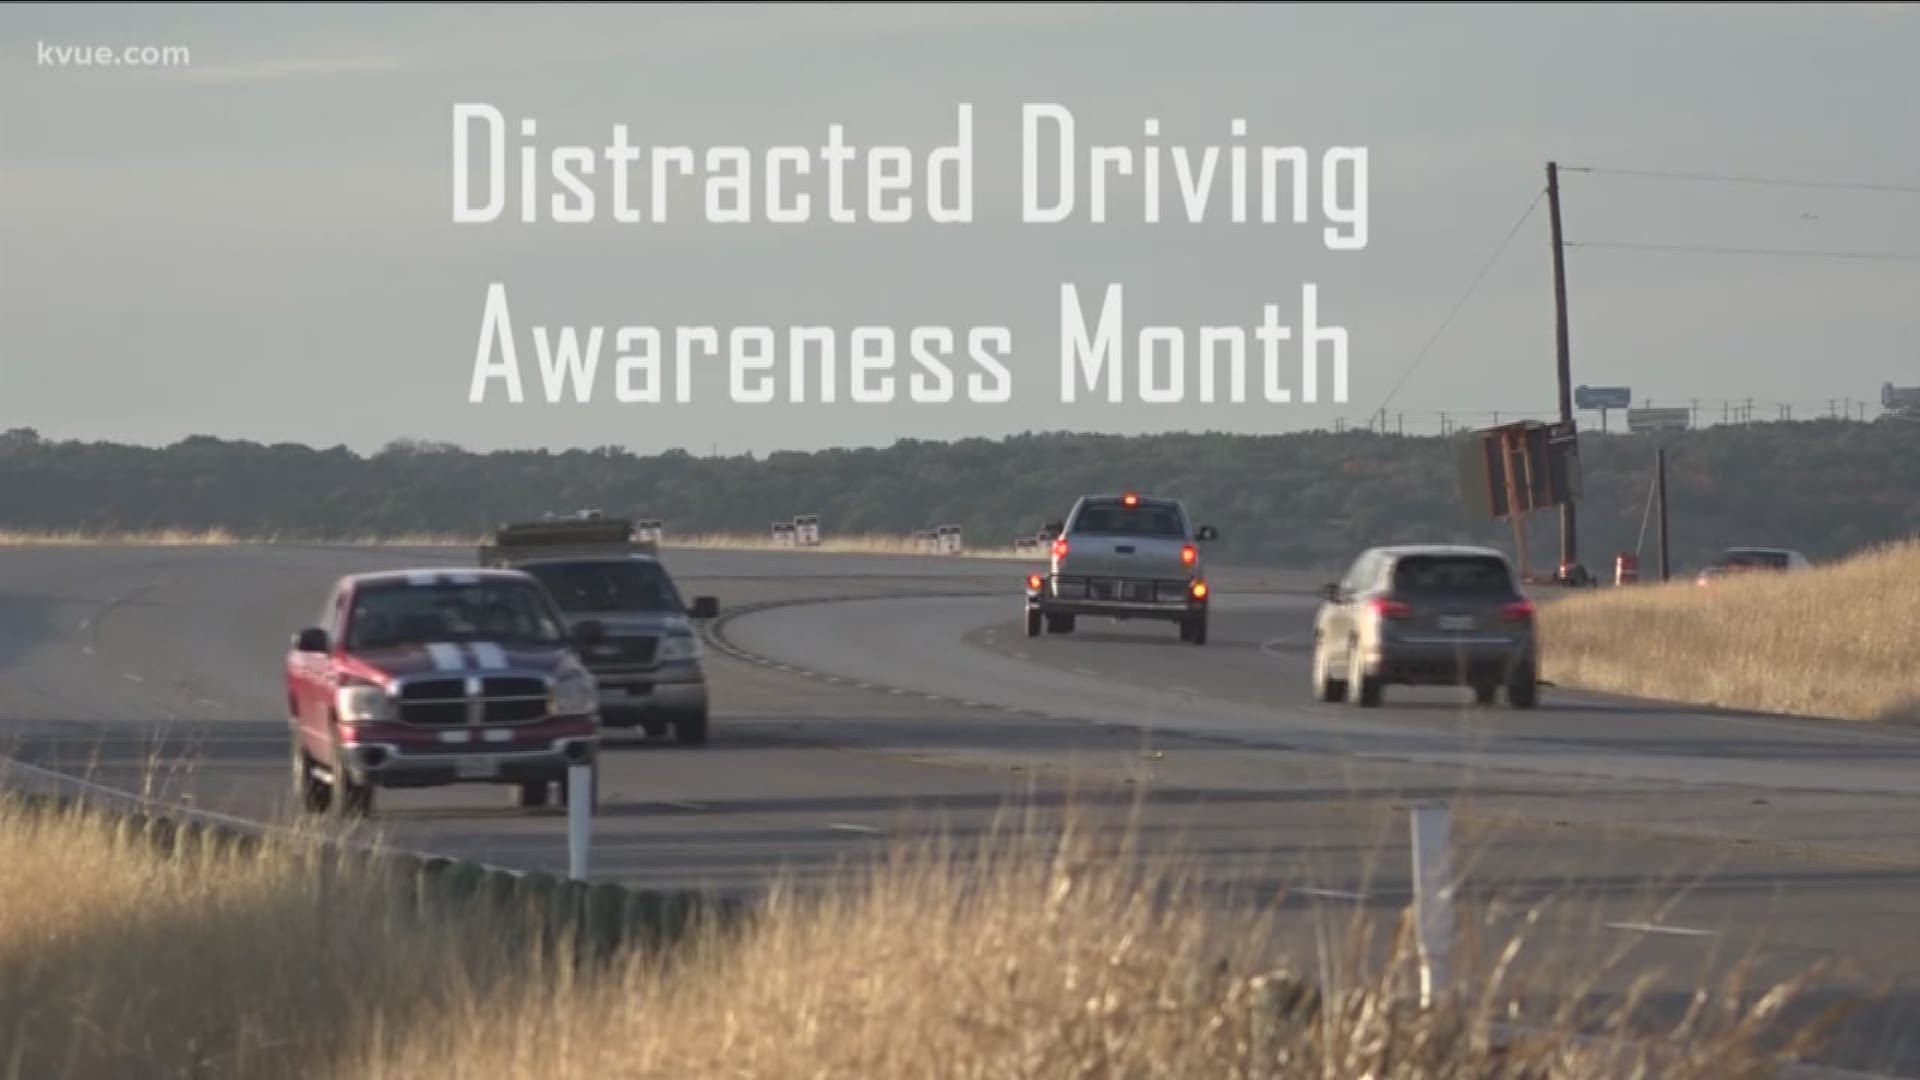 Distracted driving accounts for one in six fatal and serious injury crashes in Austin alone.